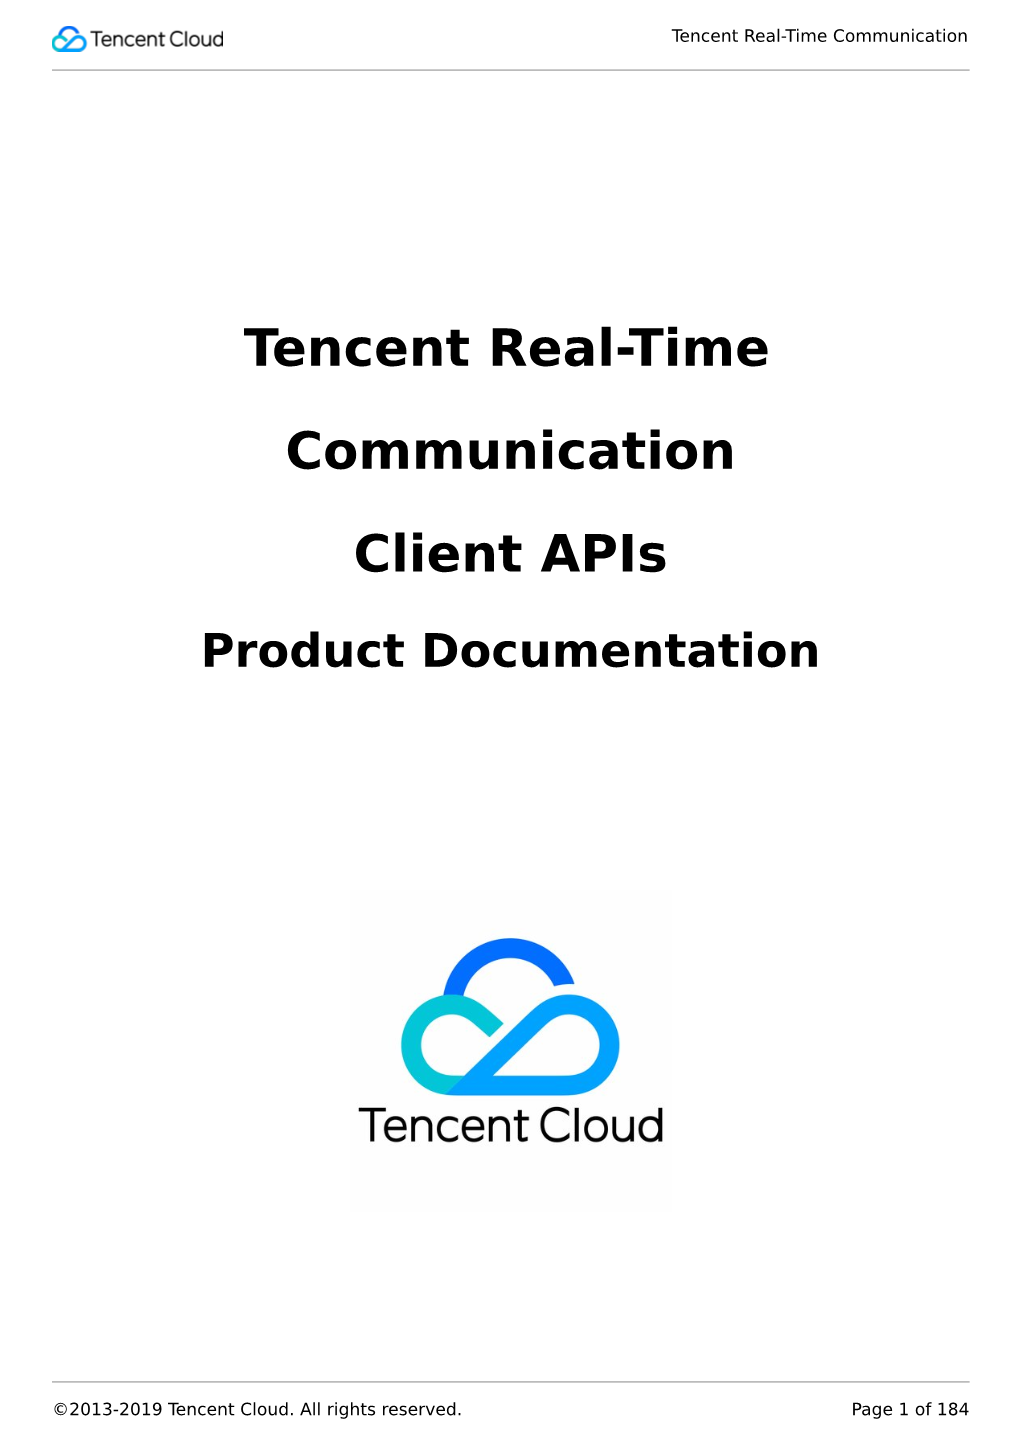 Tencent Real-Time Communication Client Apis